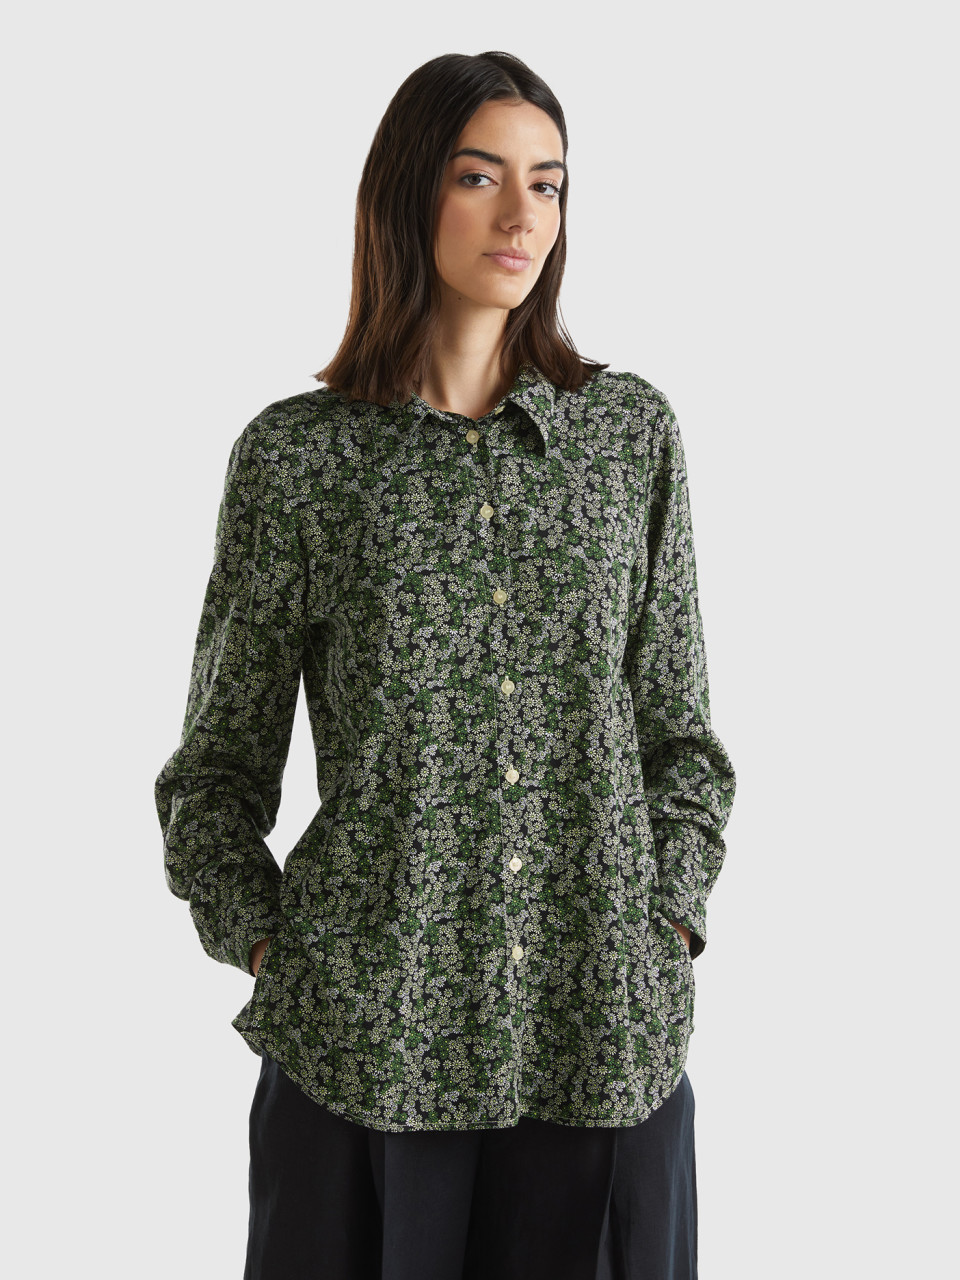 Benetton, Patterned Shirt In Sustainable Viscose, Multi-color, Women